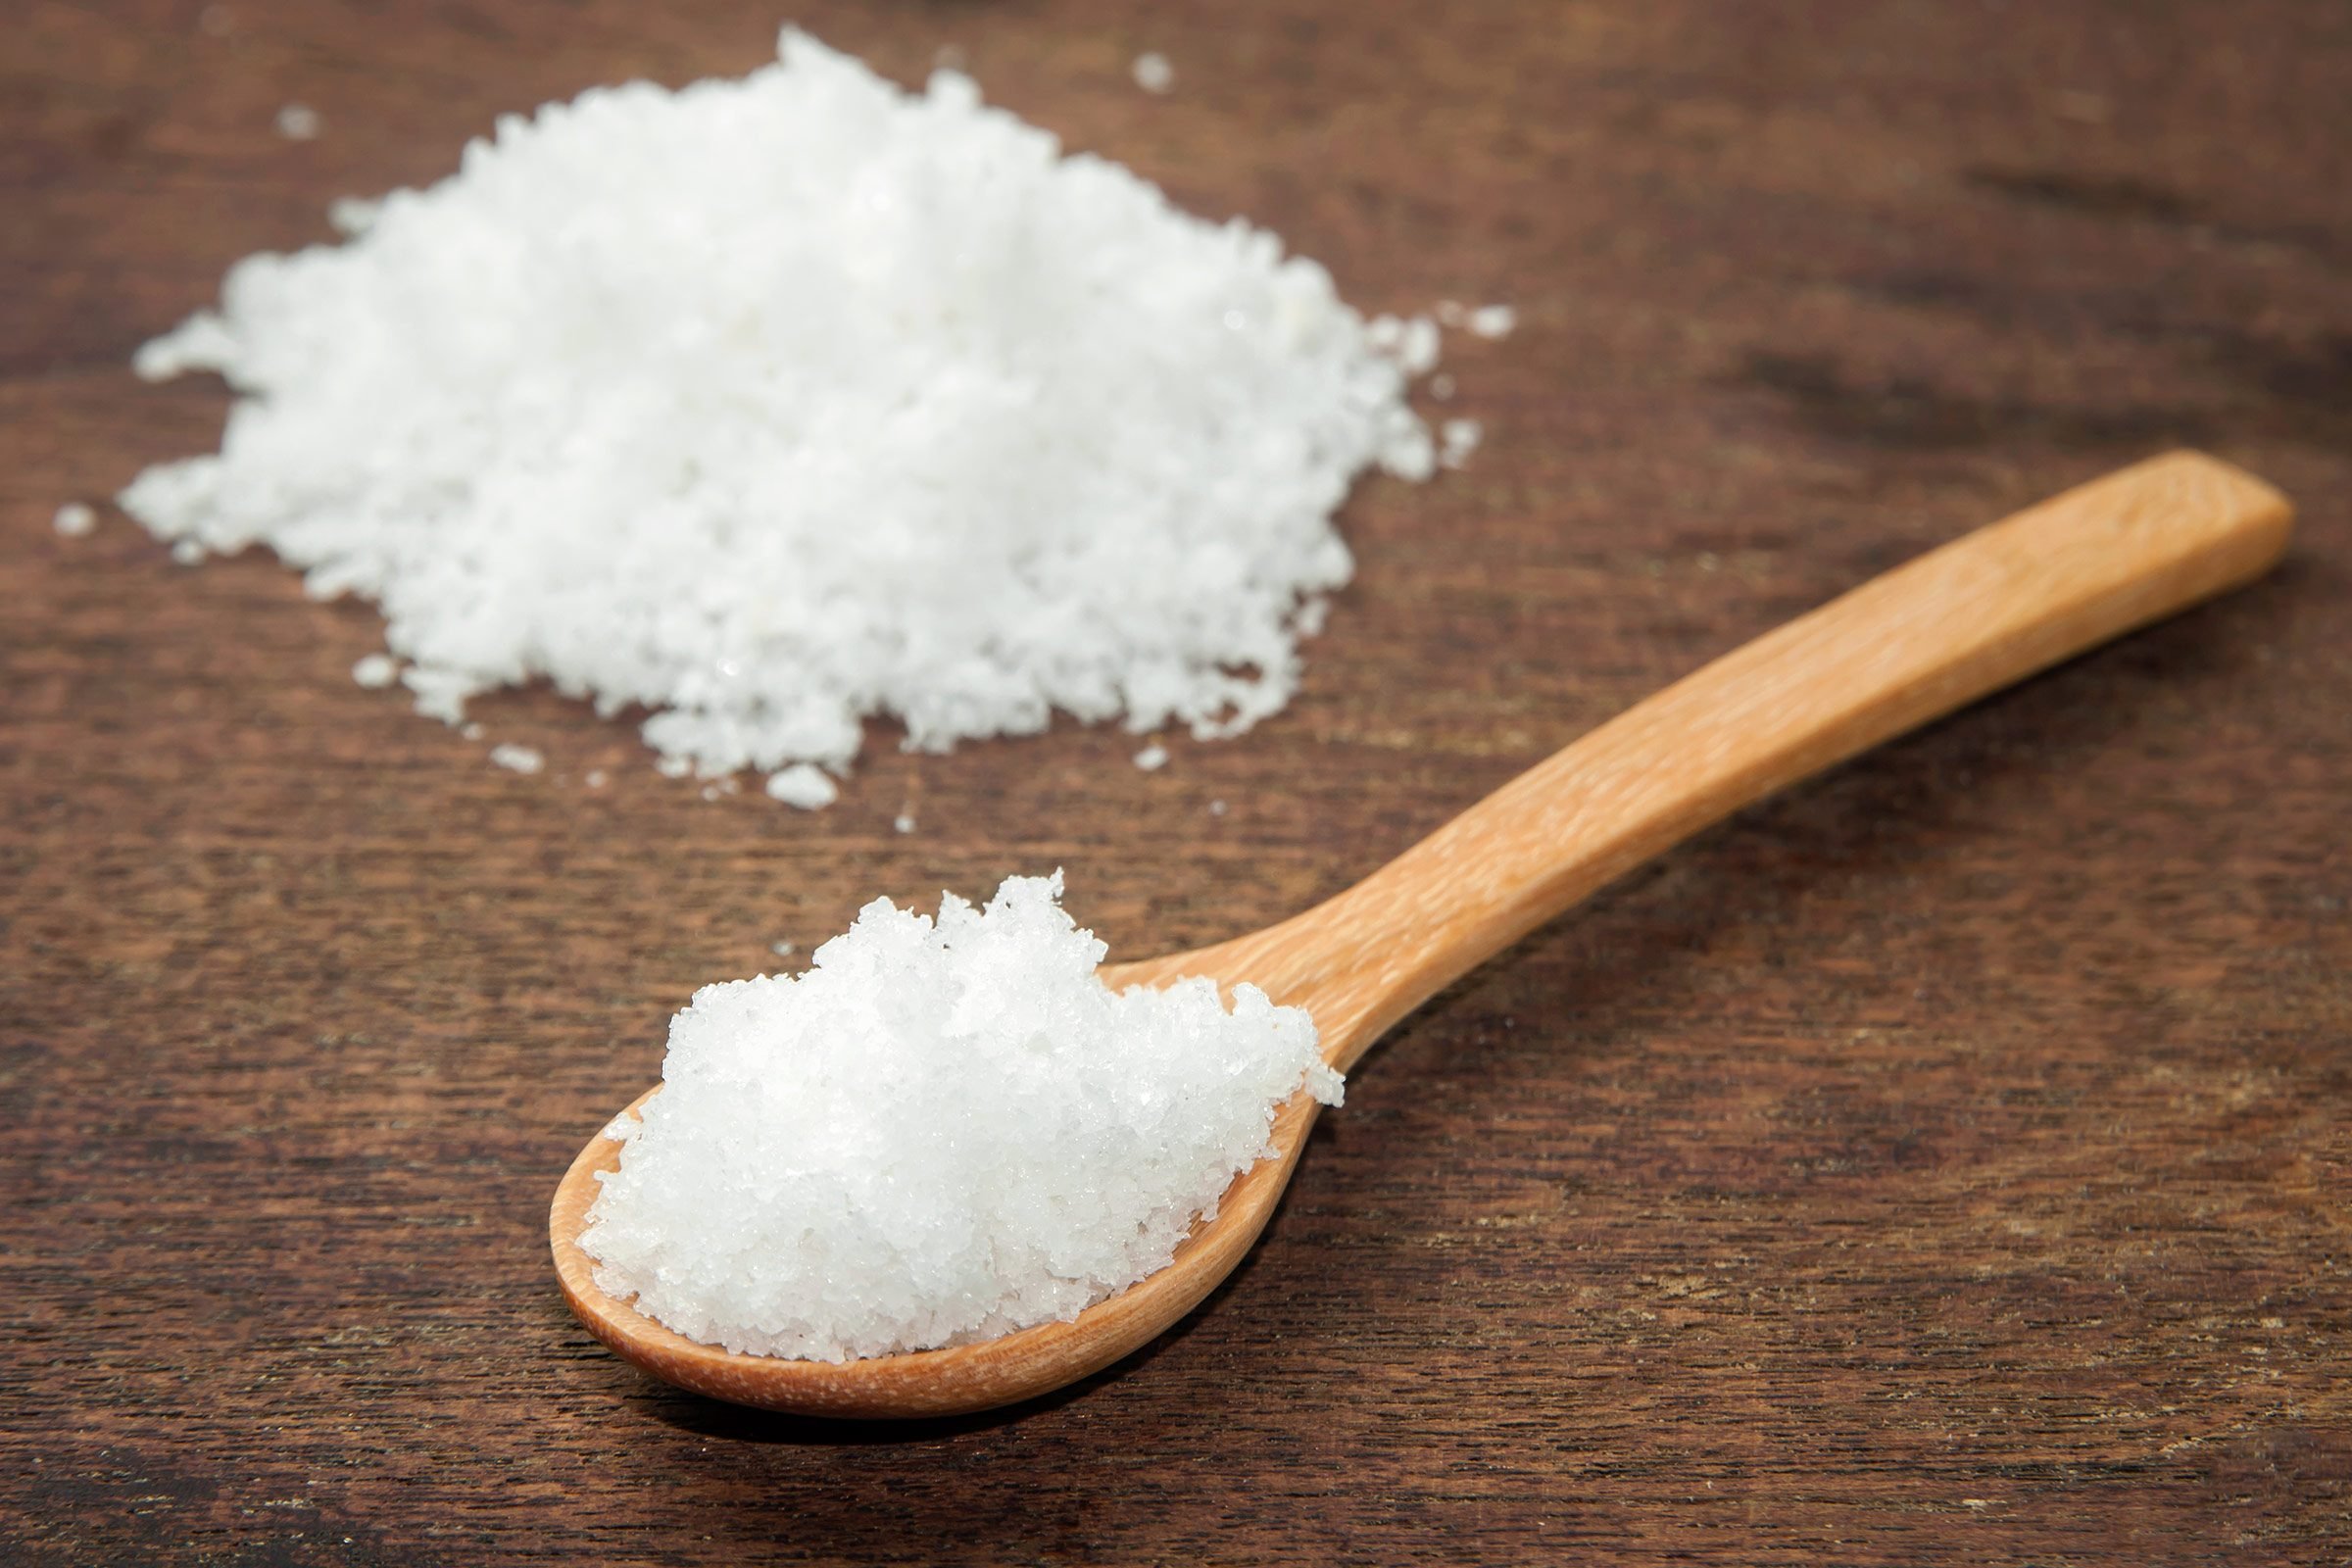 Wooden spoon of salt on a wooden table. Pile of salt behind it.